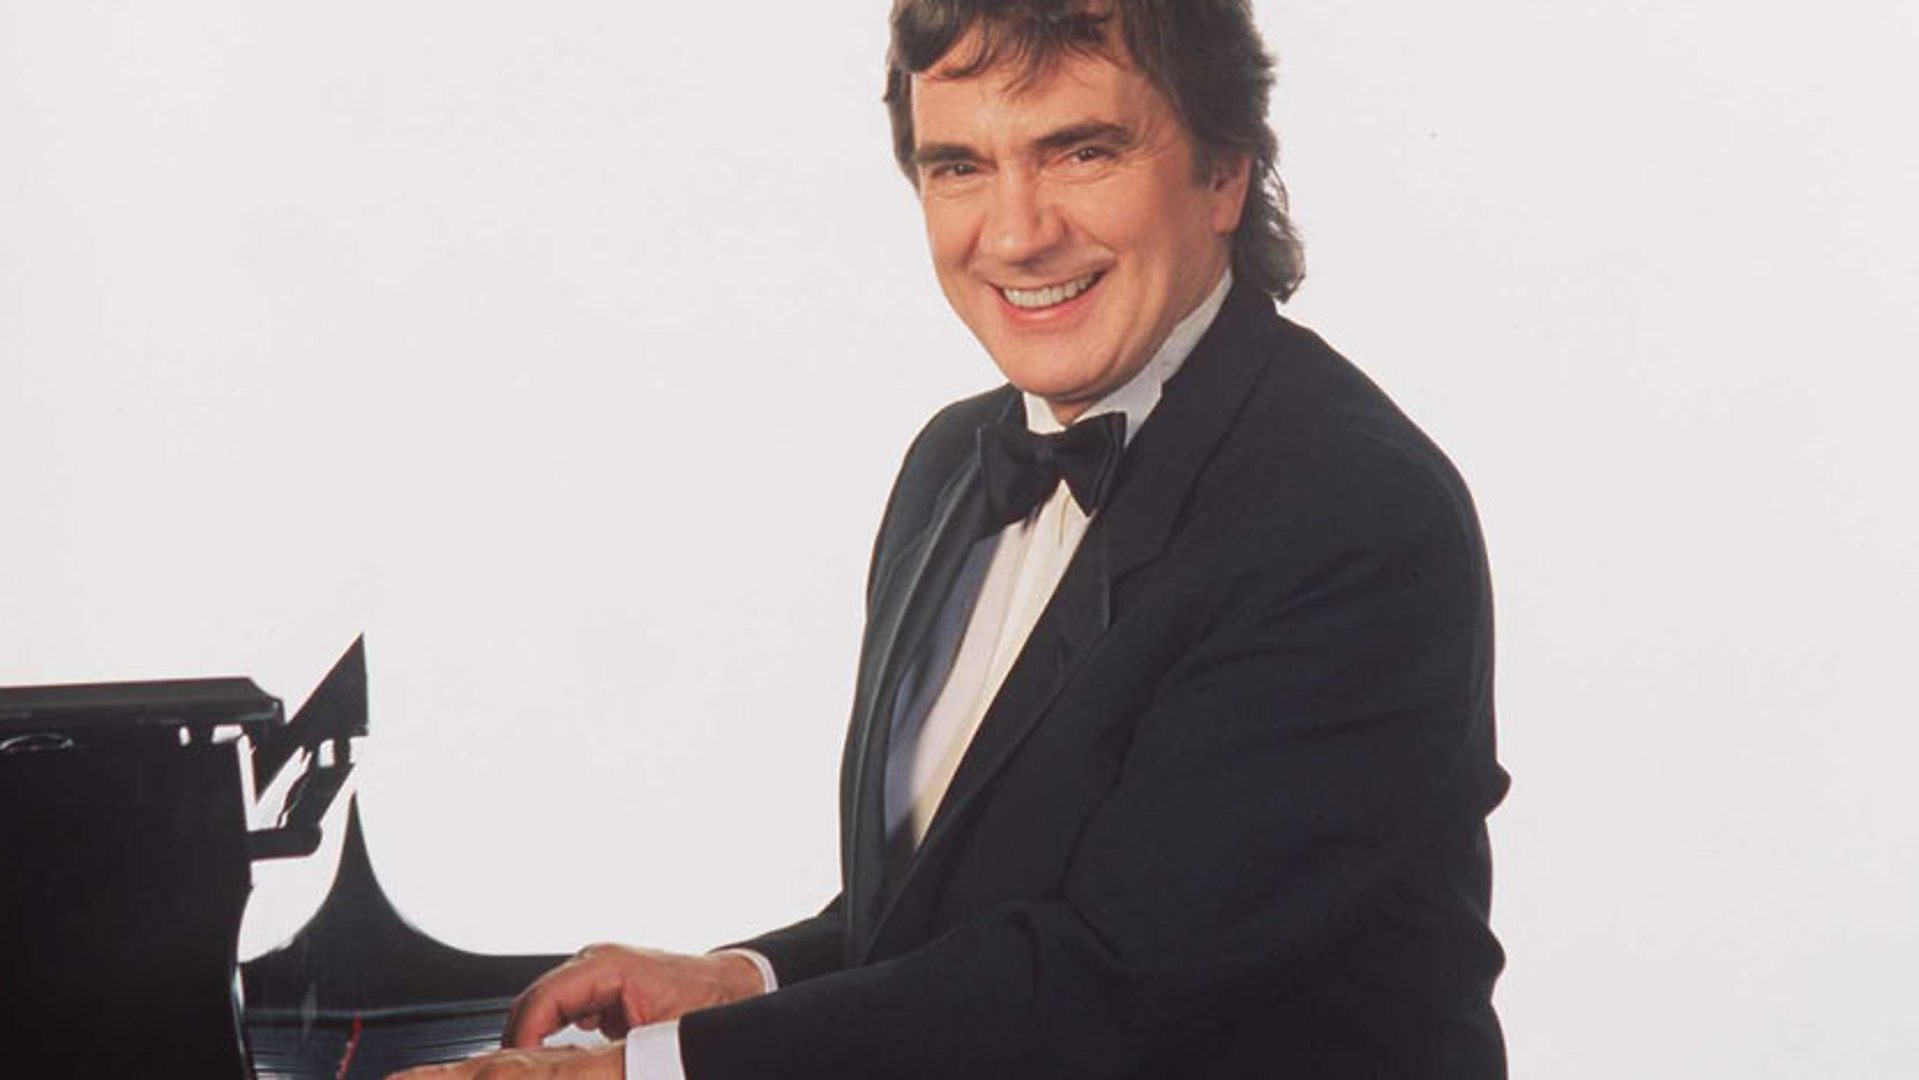 Happy Birthday to Dudley Moore, who would have turned 82 today! 